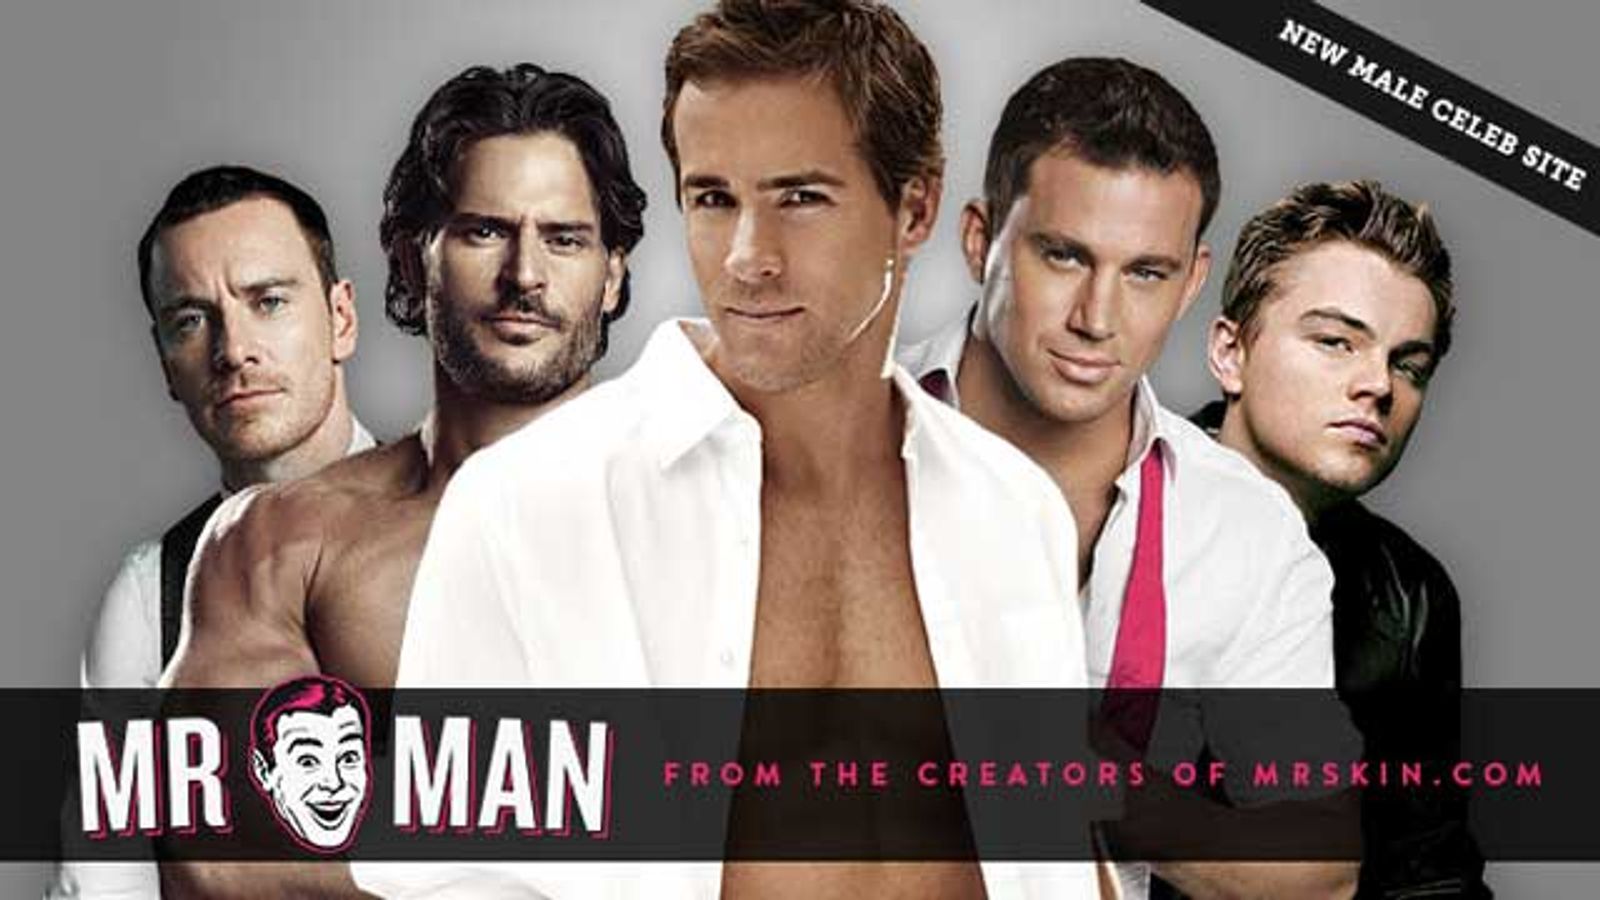 Mr. Skin Launches Male Nudity Site, Mr. Man